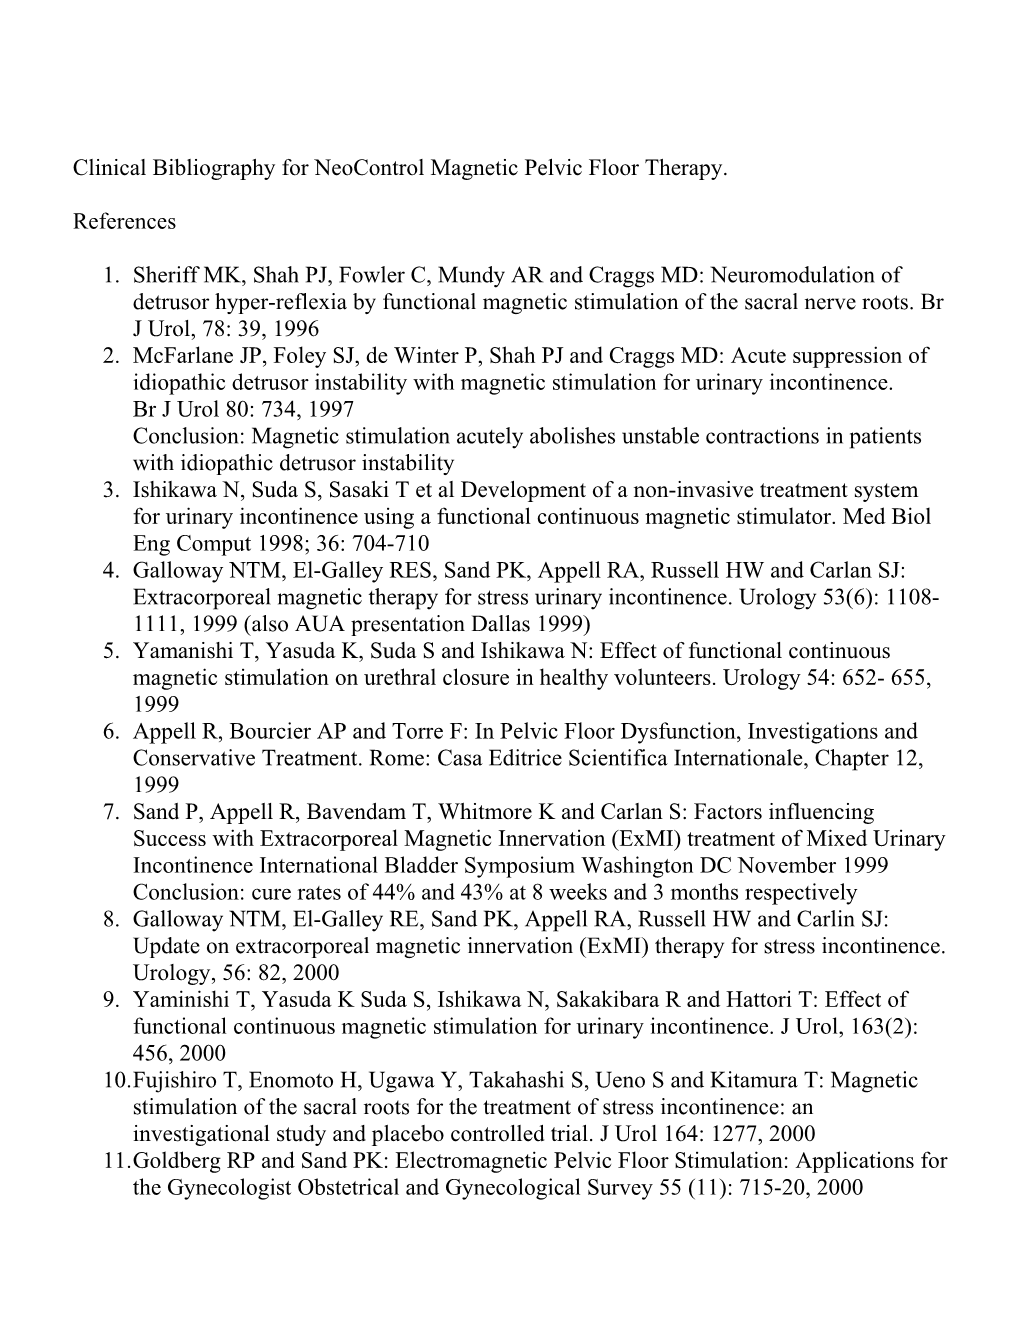 Clinical Bibliography for Neocontrol Magnetic Pelvic Floor Therapy